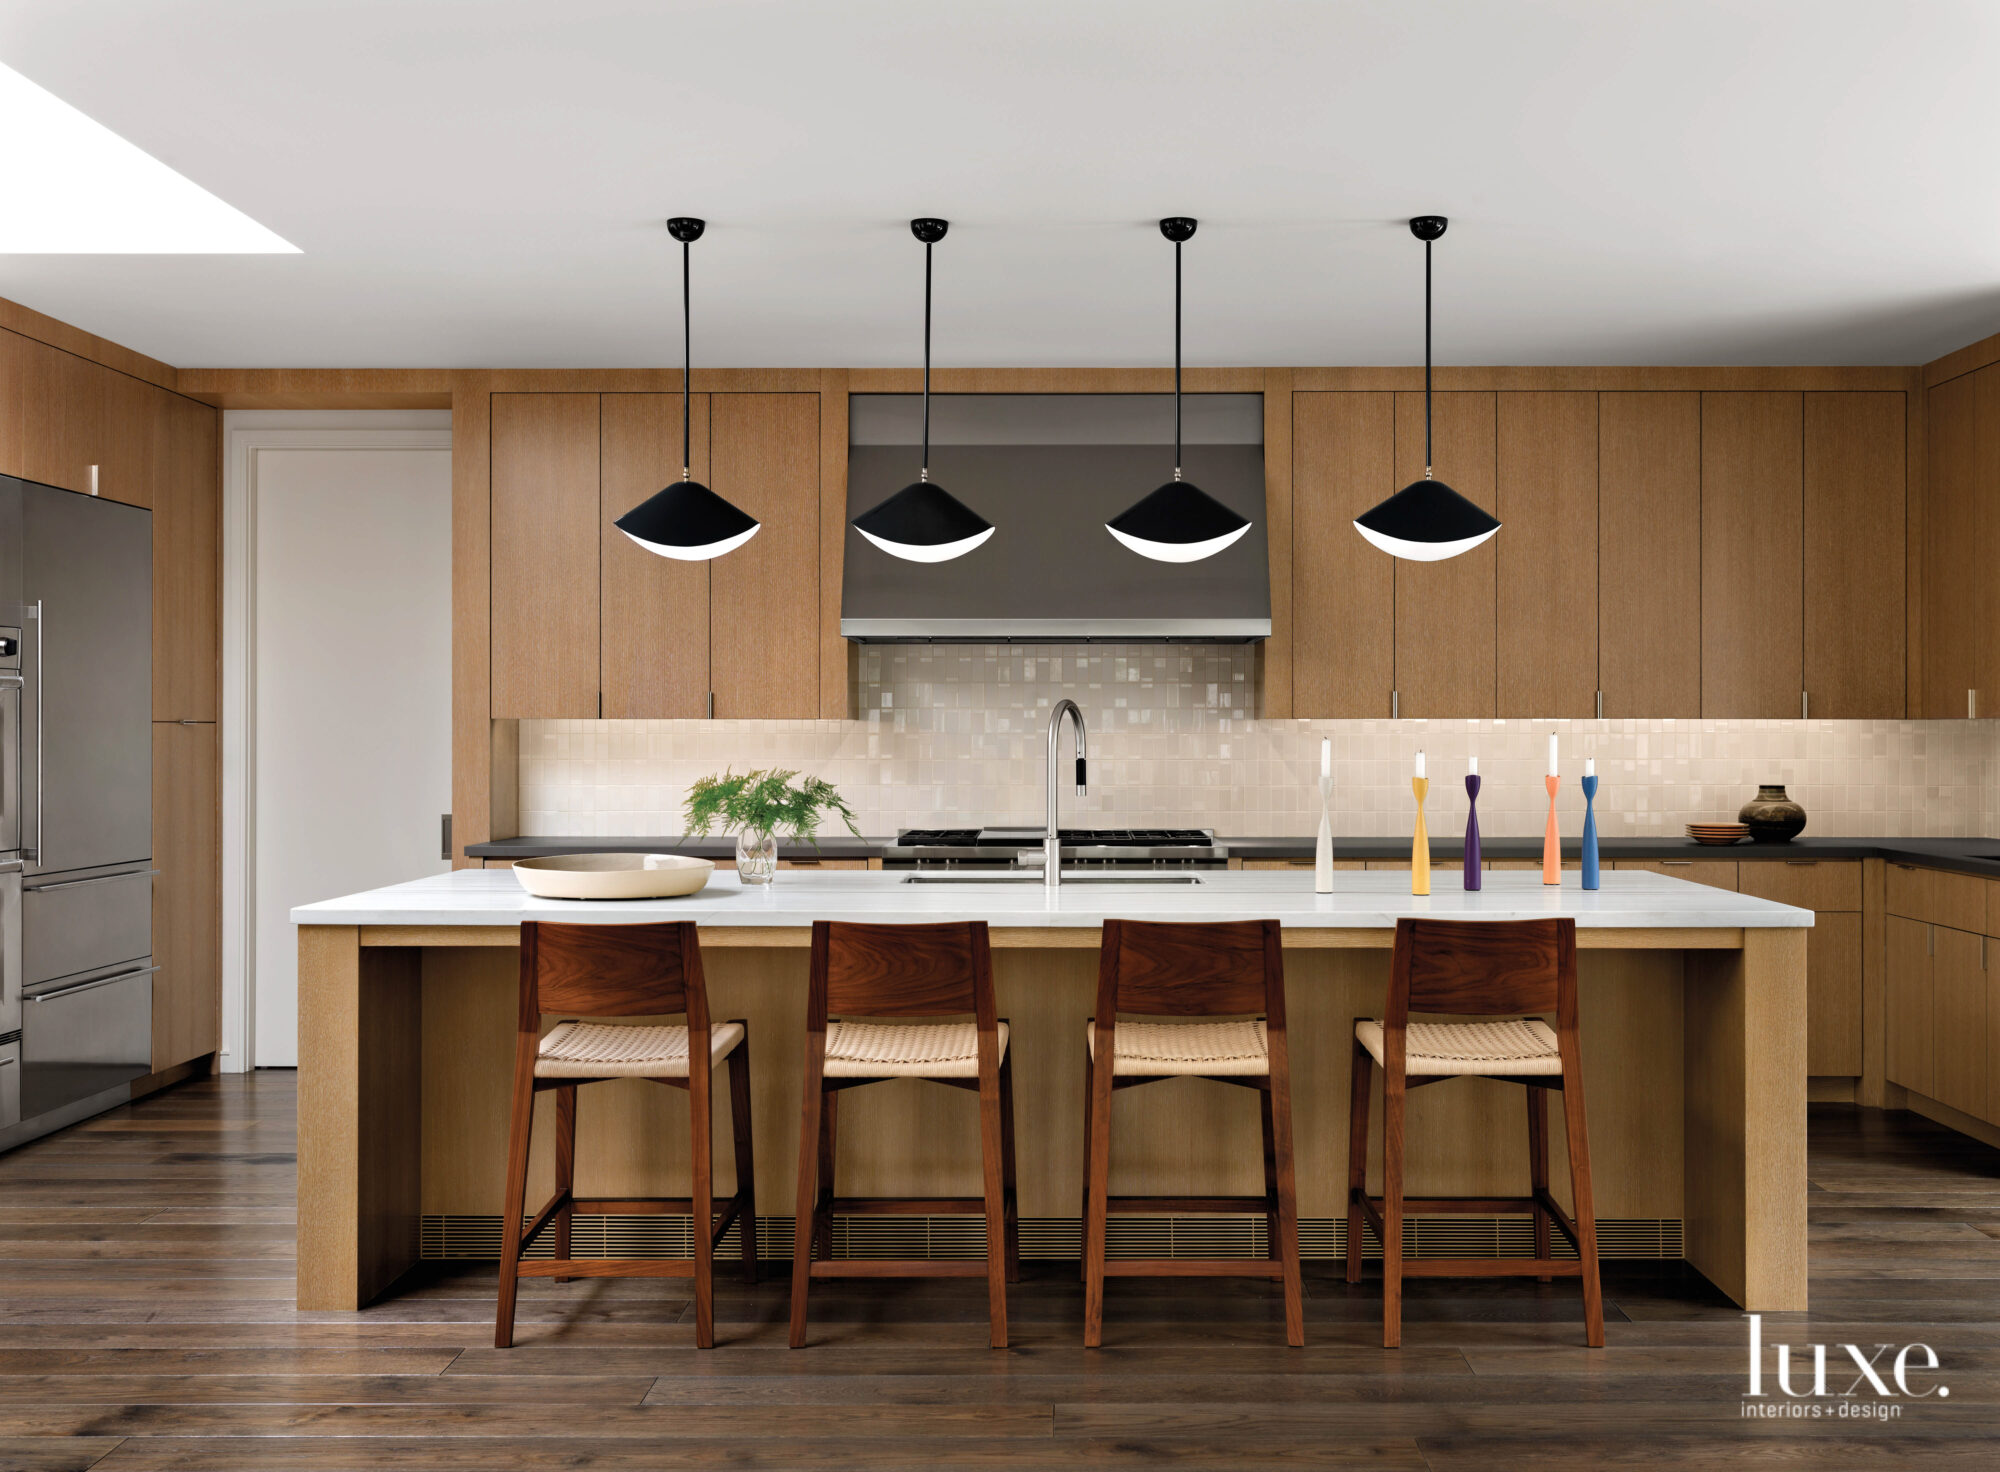 The kitchen has a large island lined by a row of seats and topped by a line of light fixtures.